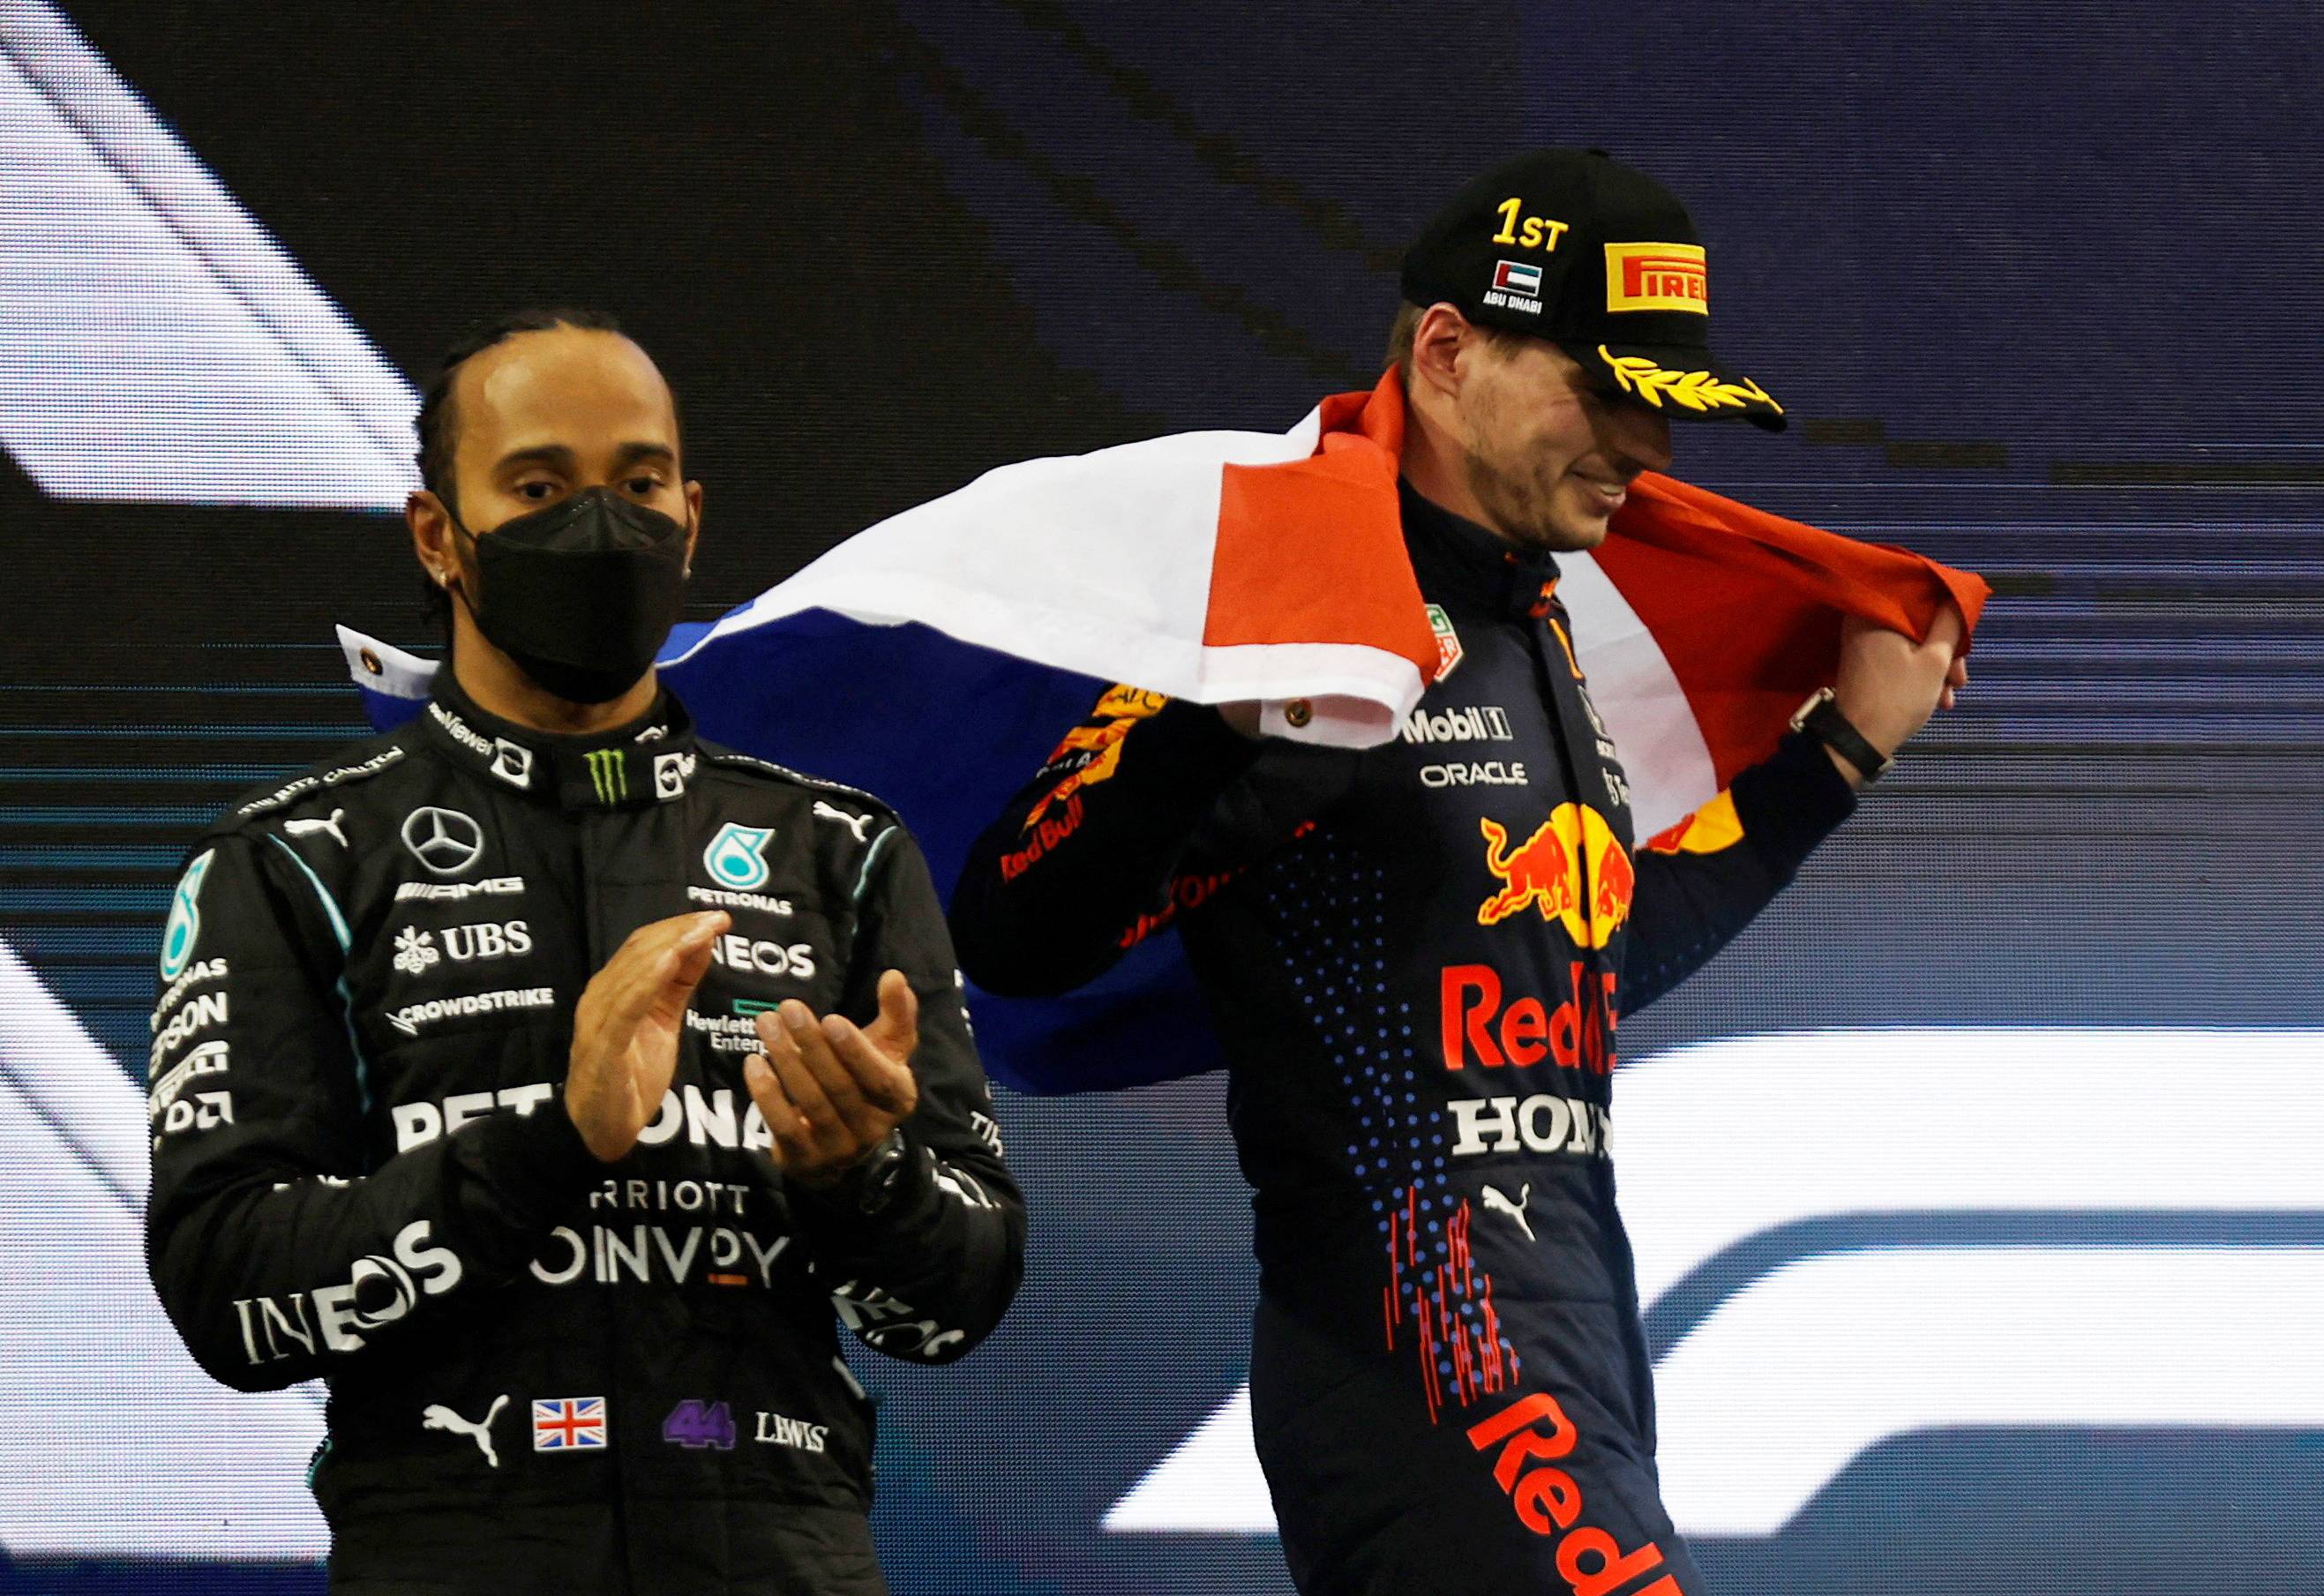 How Max Verstappen won a controversial Abu Dhabi GP for his first